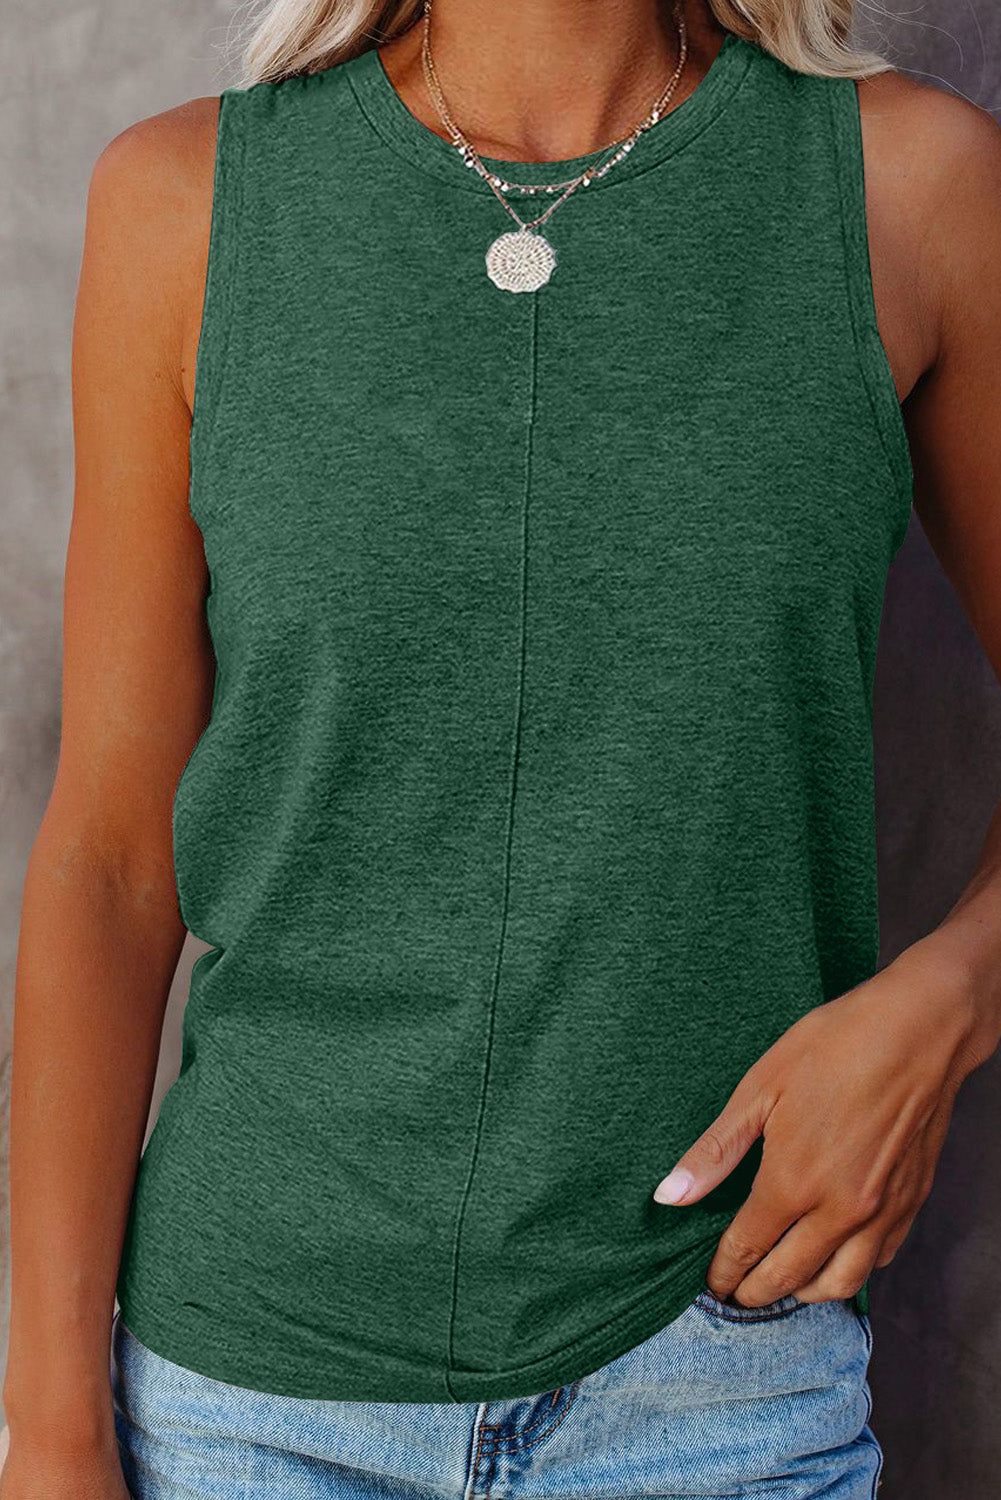 Green Solid Color Crewneck Sleeveless Top